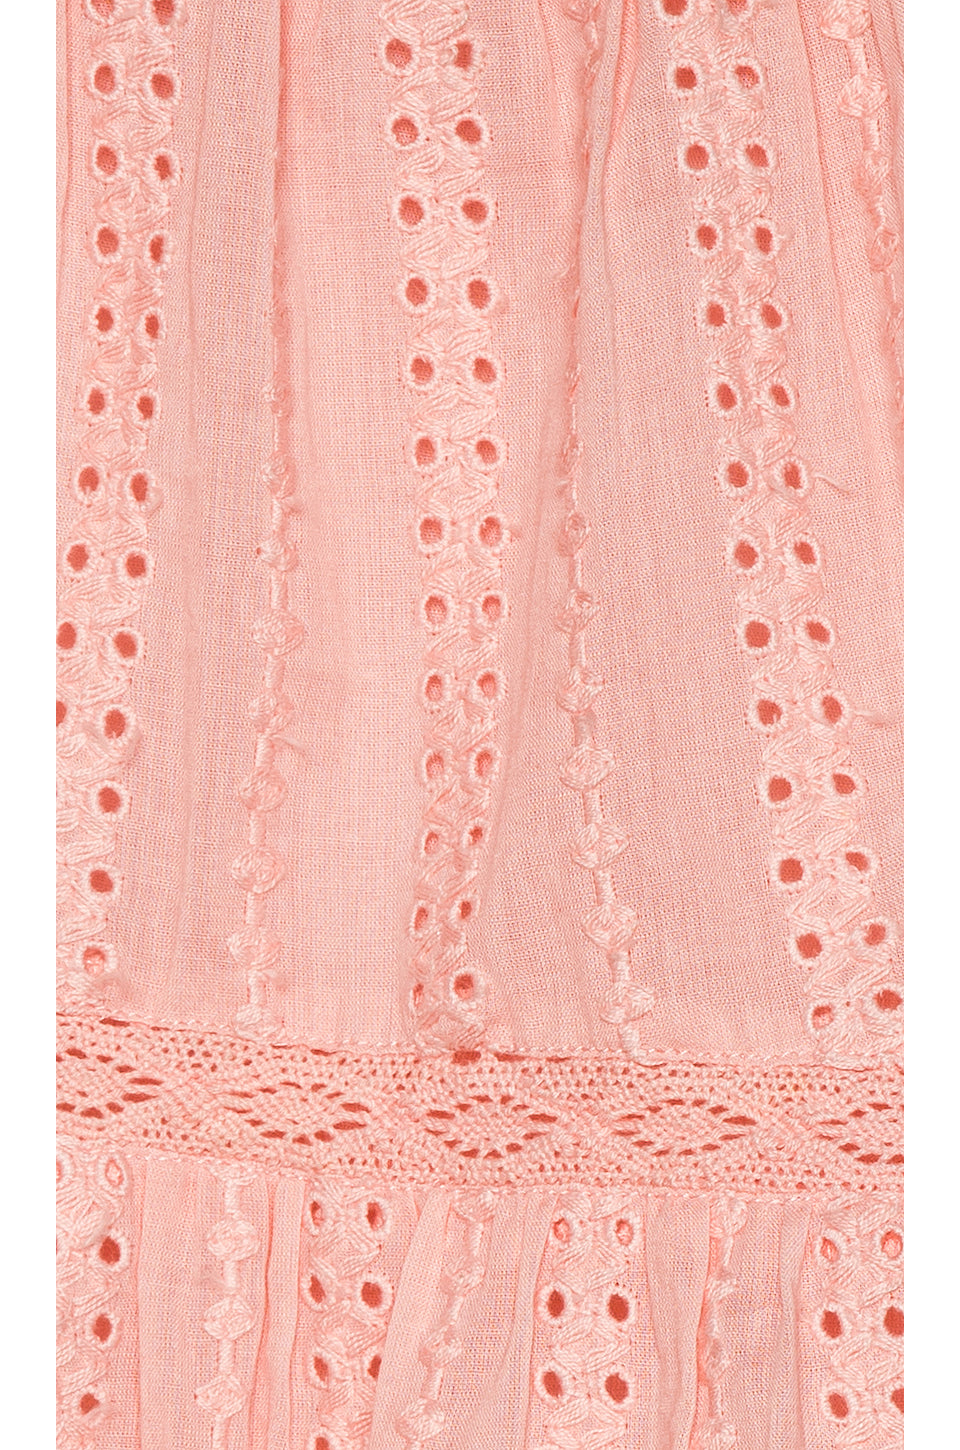 Nialey Dress in BABY PINK